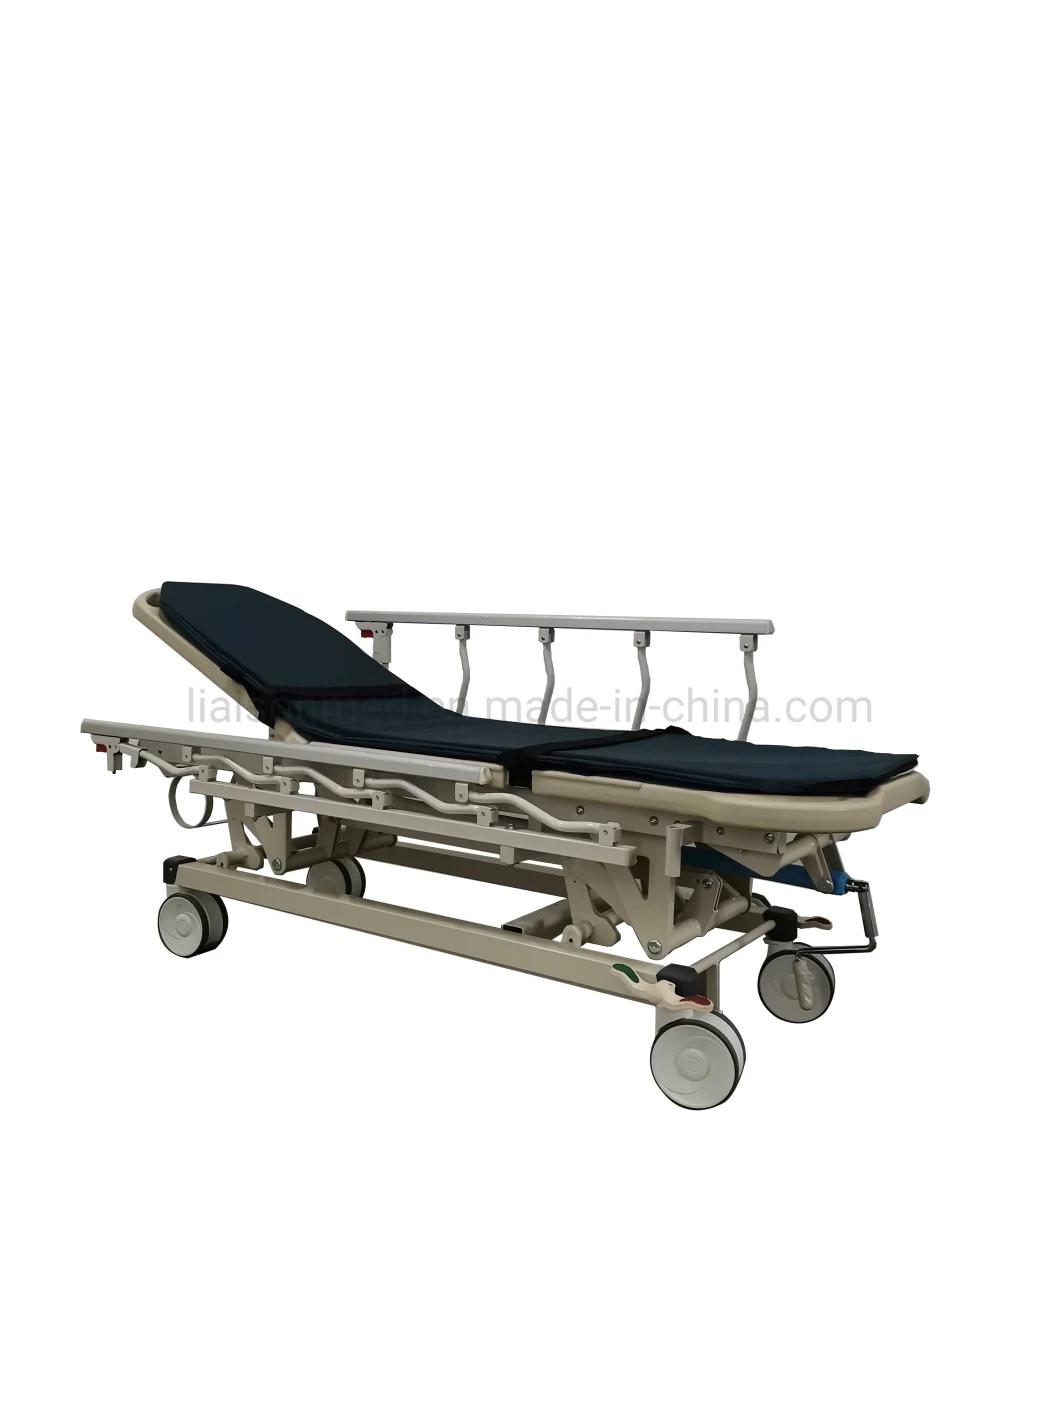 Mn-SD006 Patient Trolley Medical Equipment Patient Use Hospital Stretcher